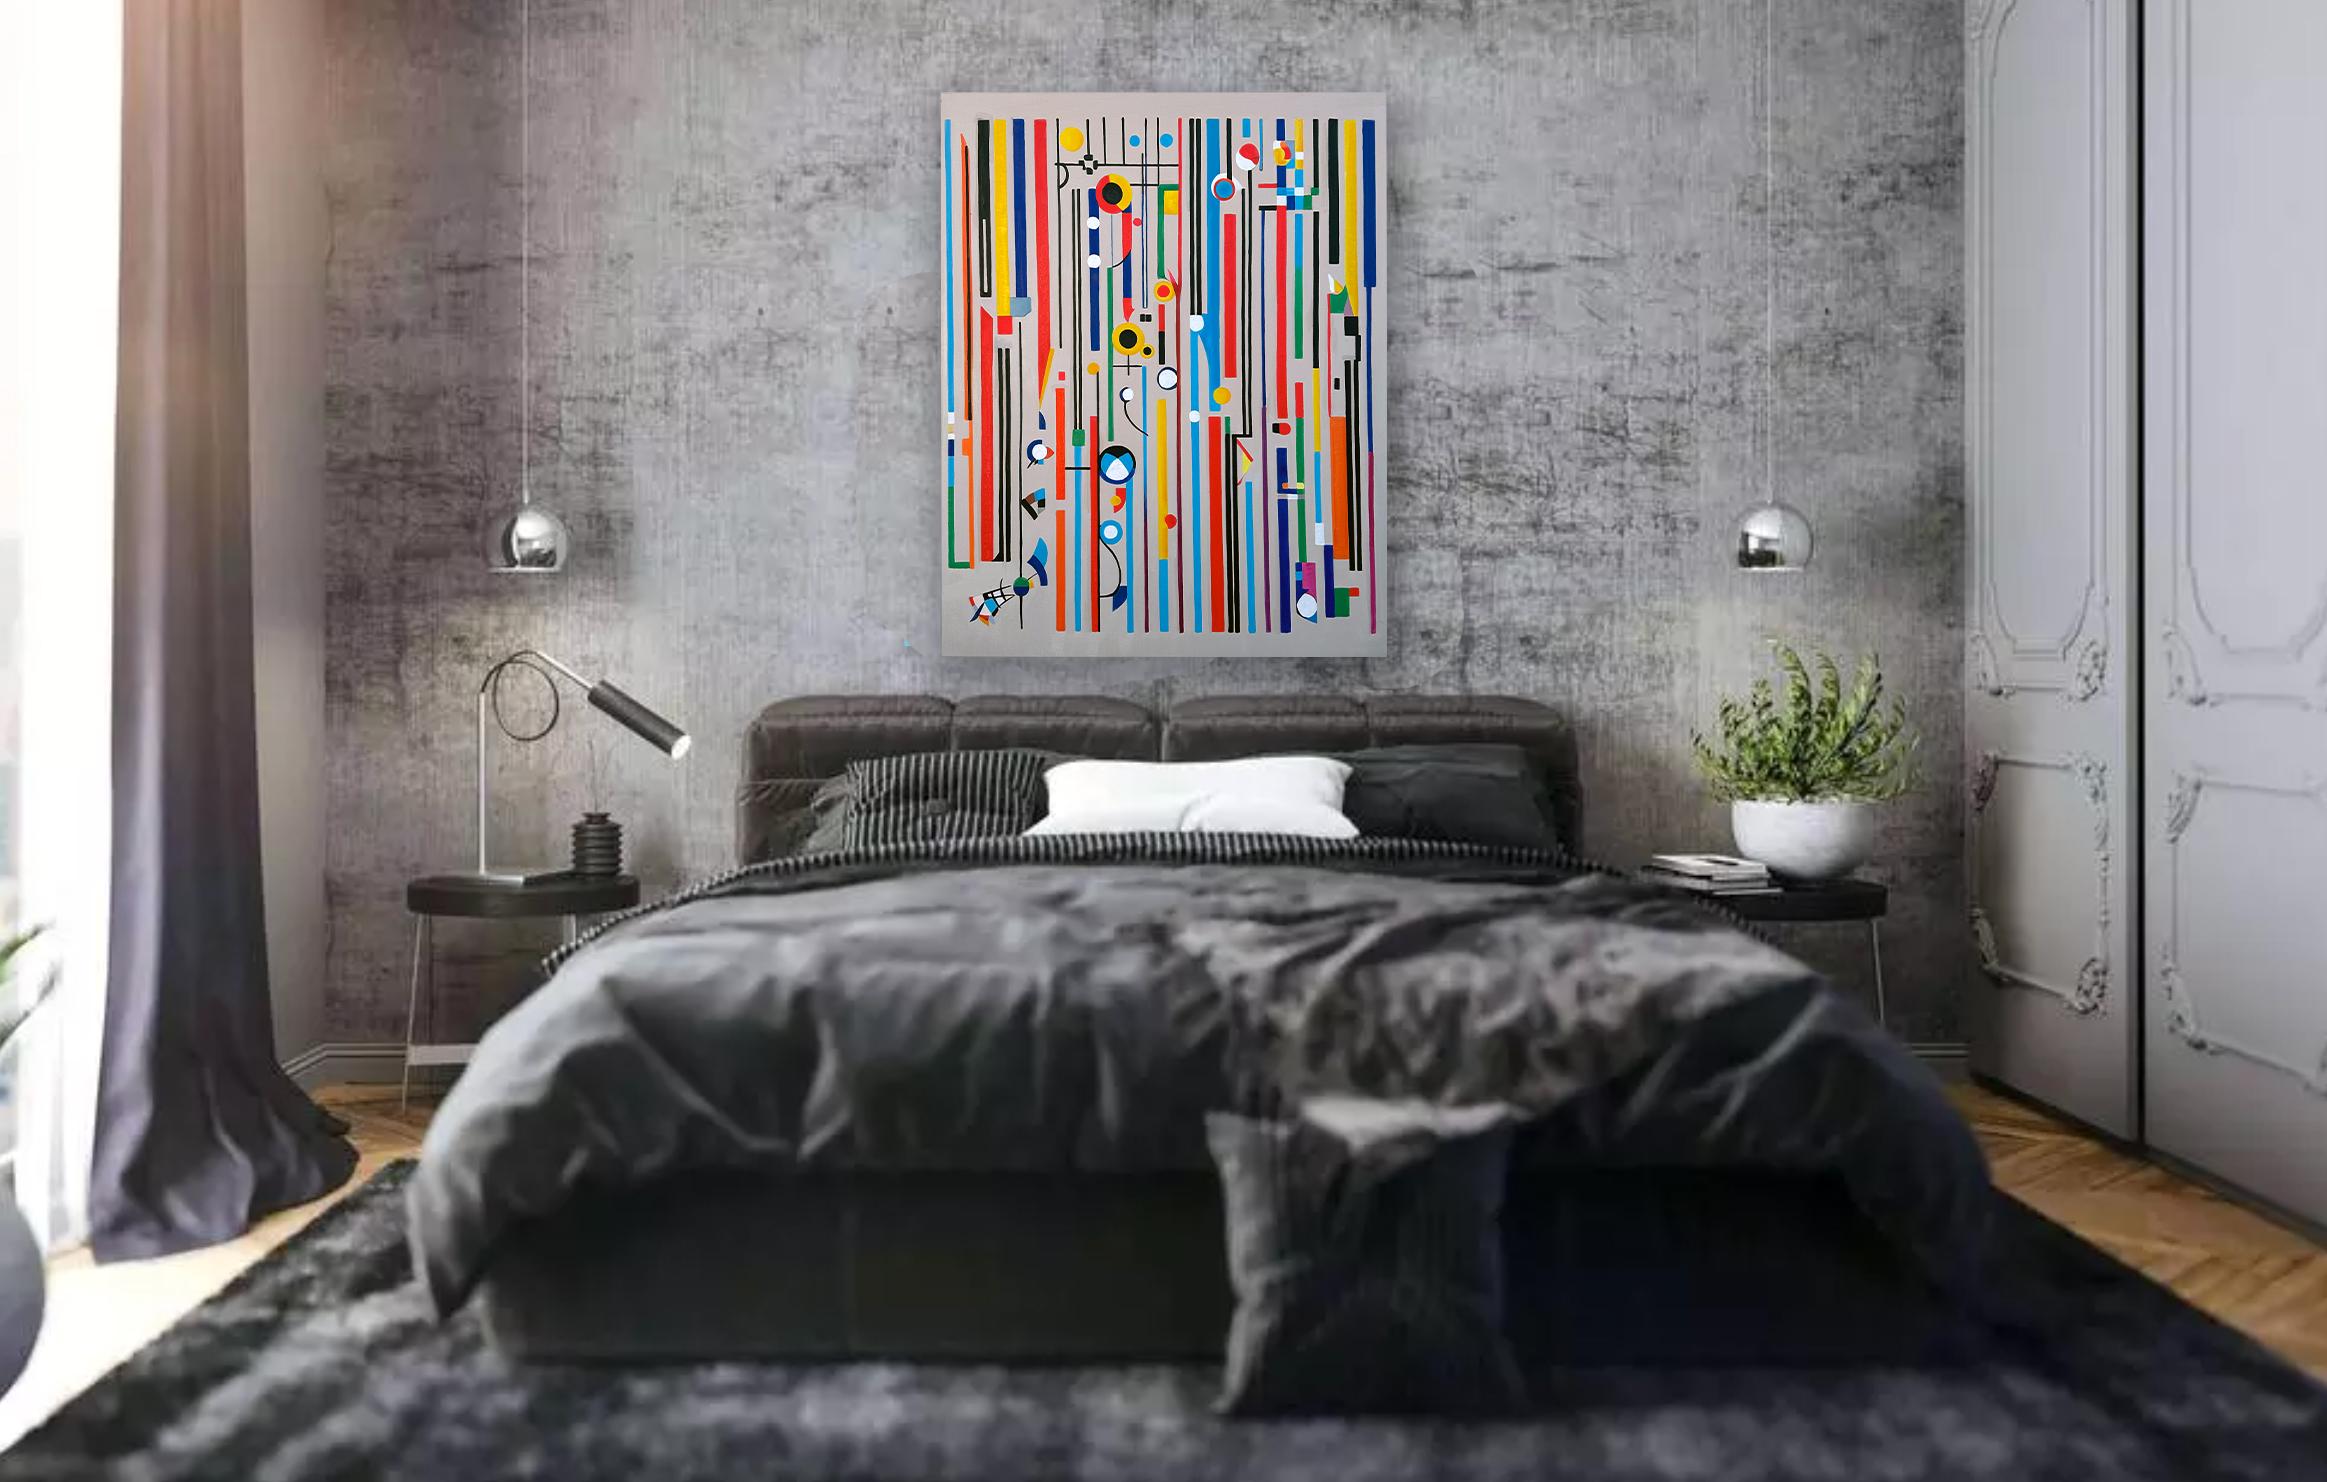 Finding You Lilly Muth - Contemporary geometric abstraction - Oil Painting For Sale 2